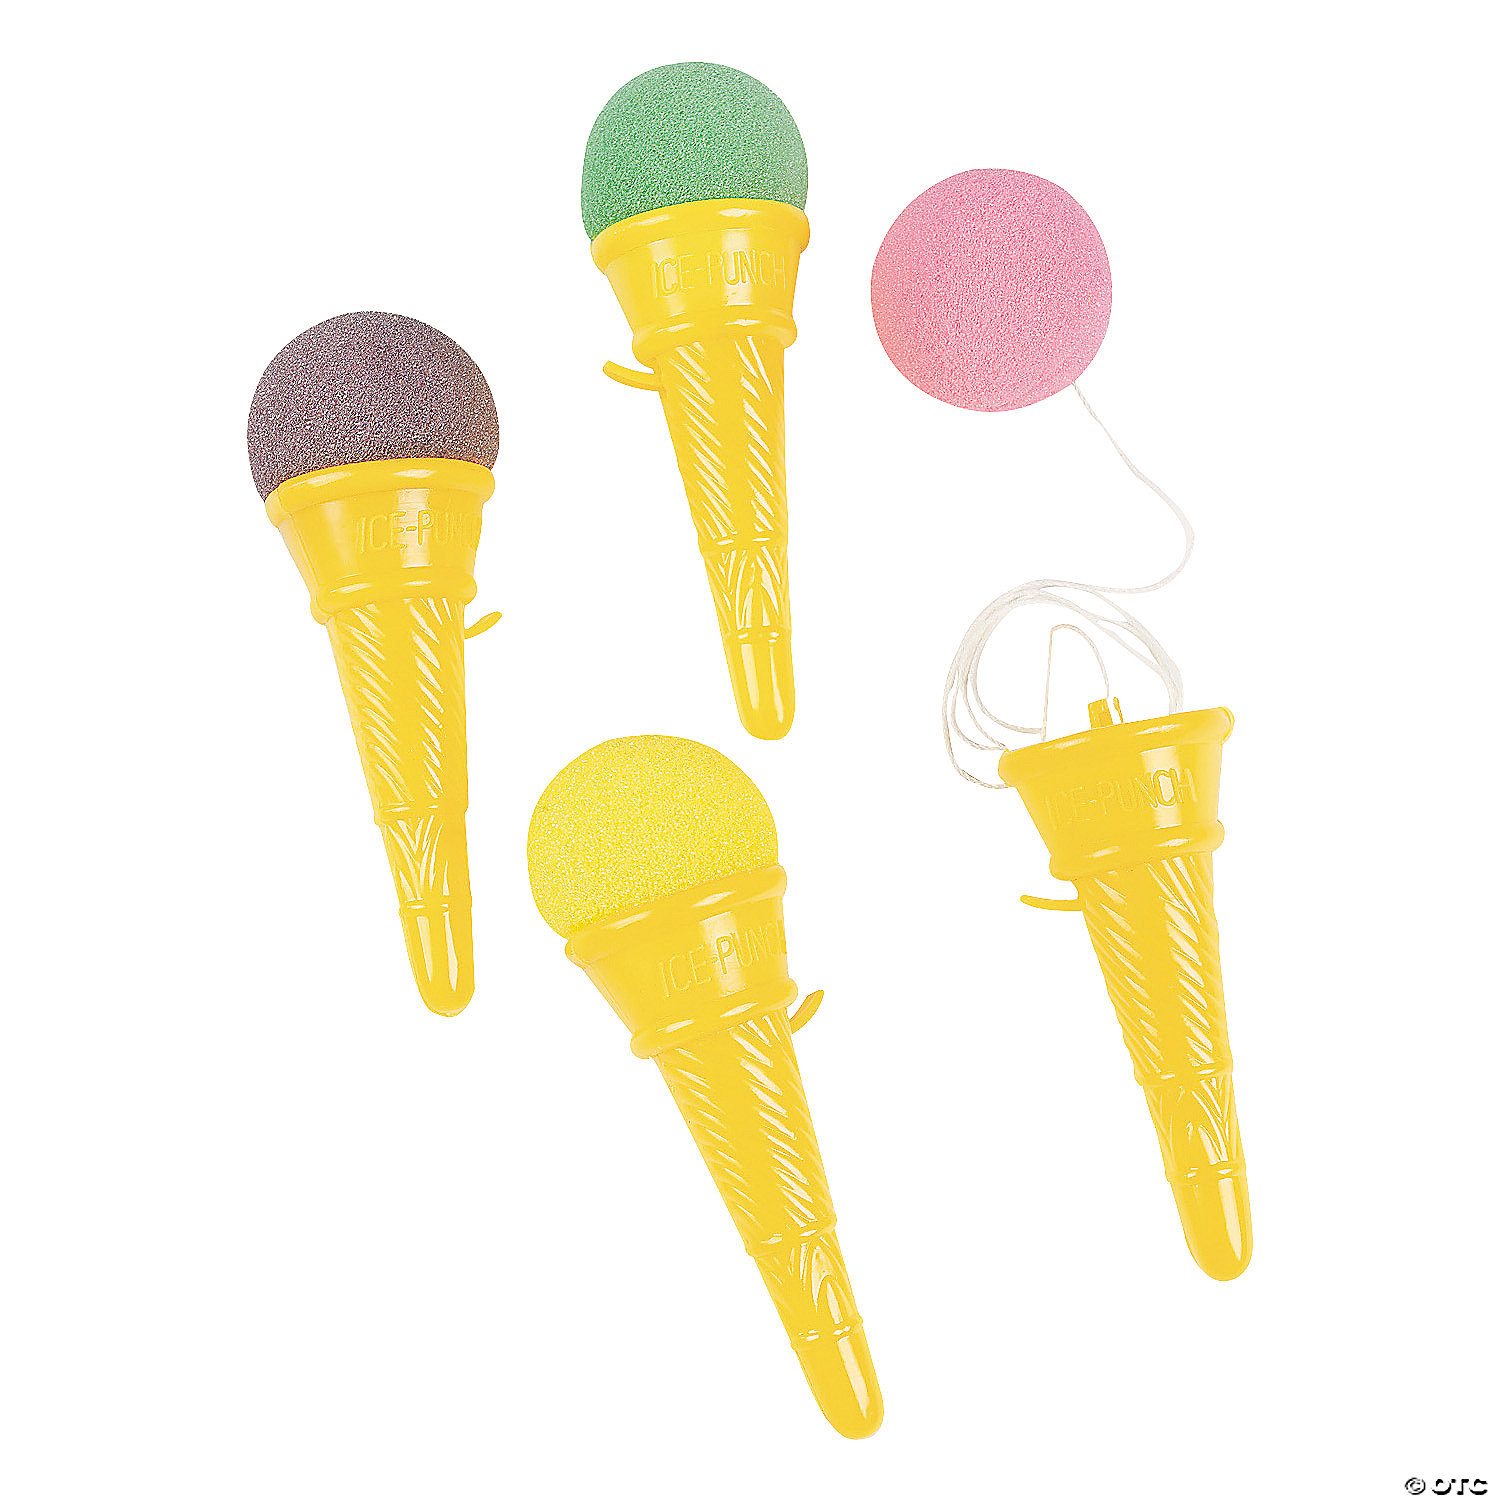 Ice cream toy Connected Cone Kids Pretend Play Food 1pc Fun Children Brand New 